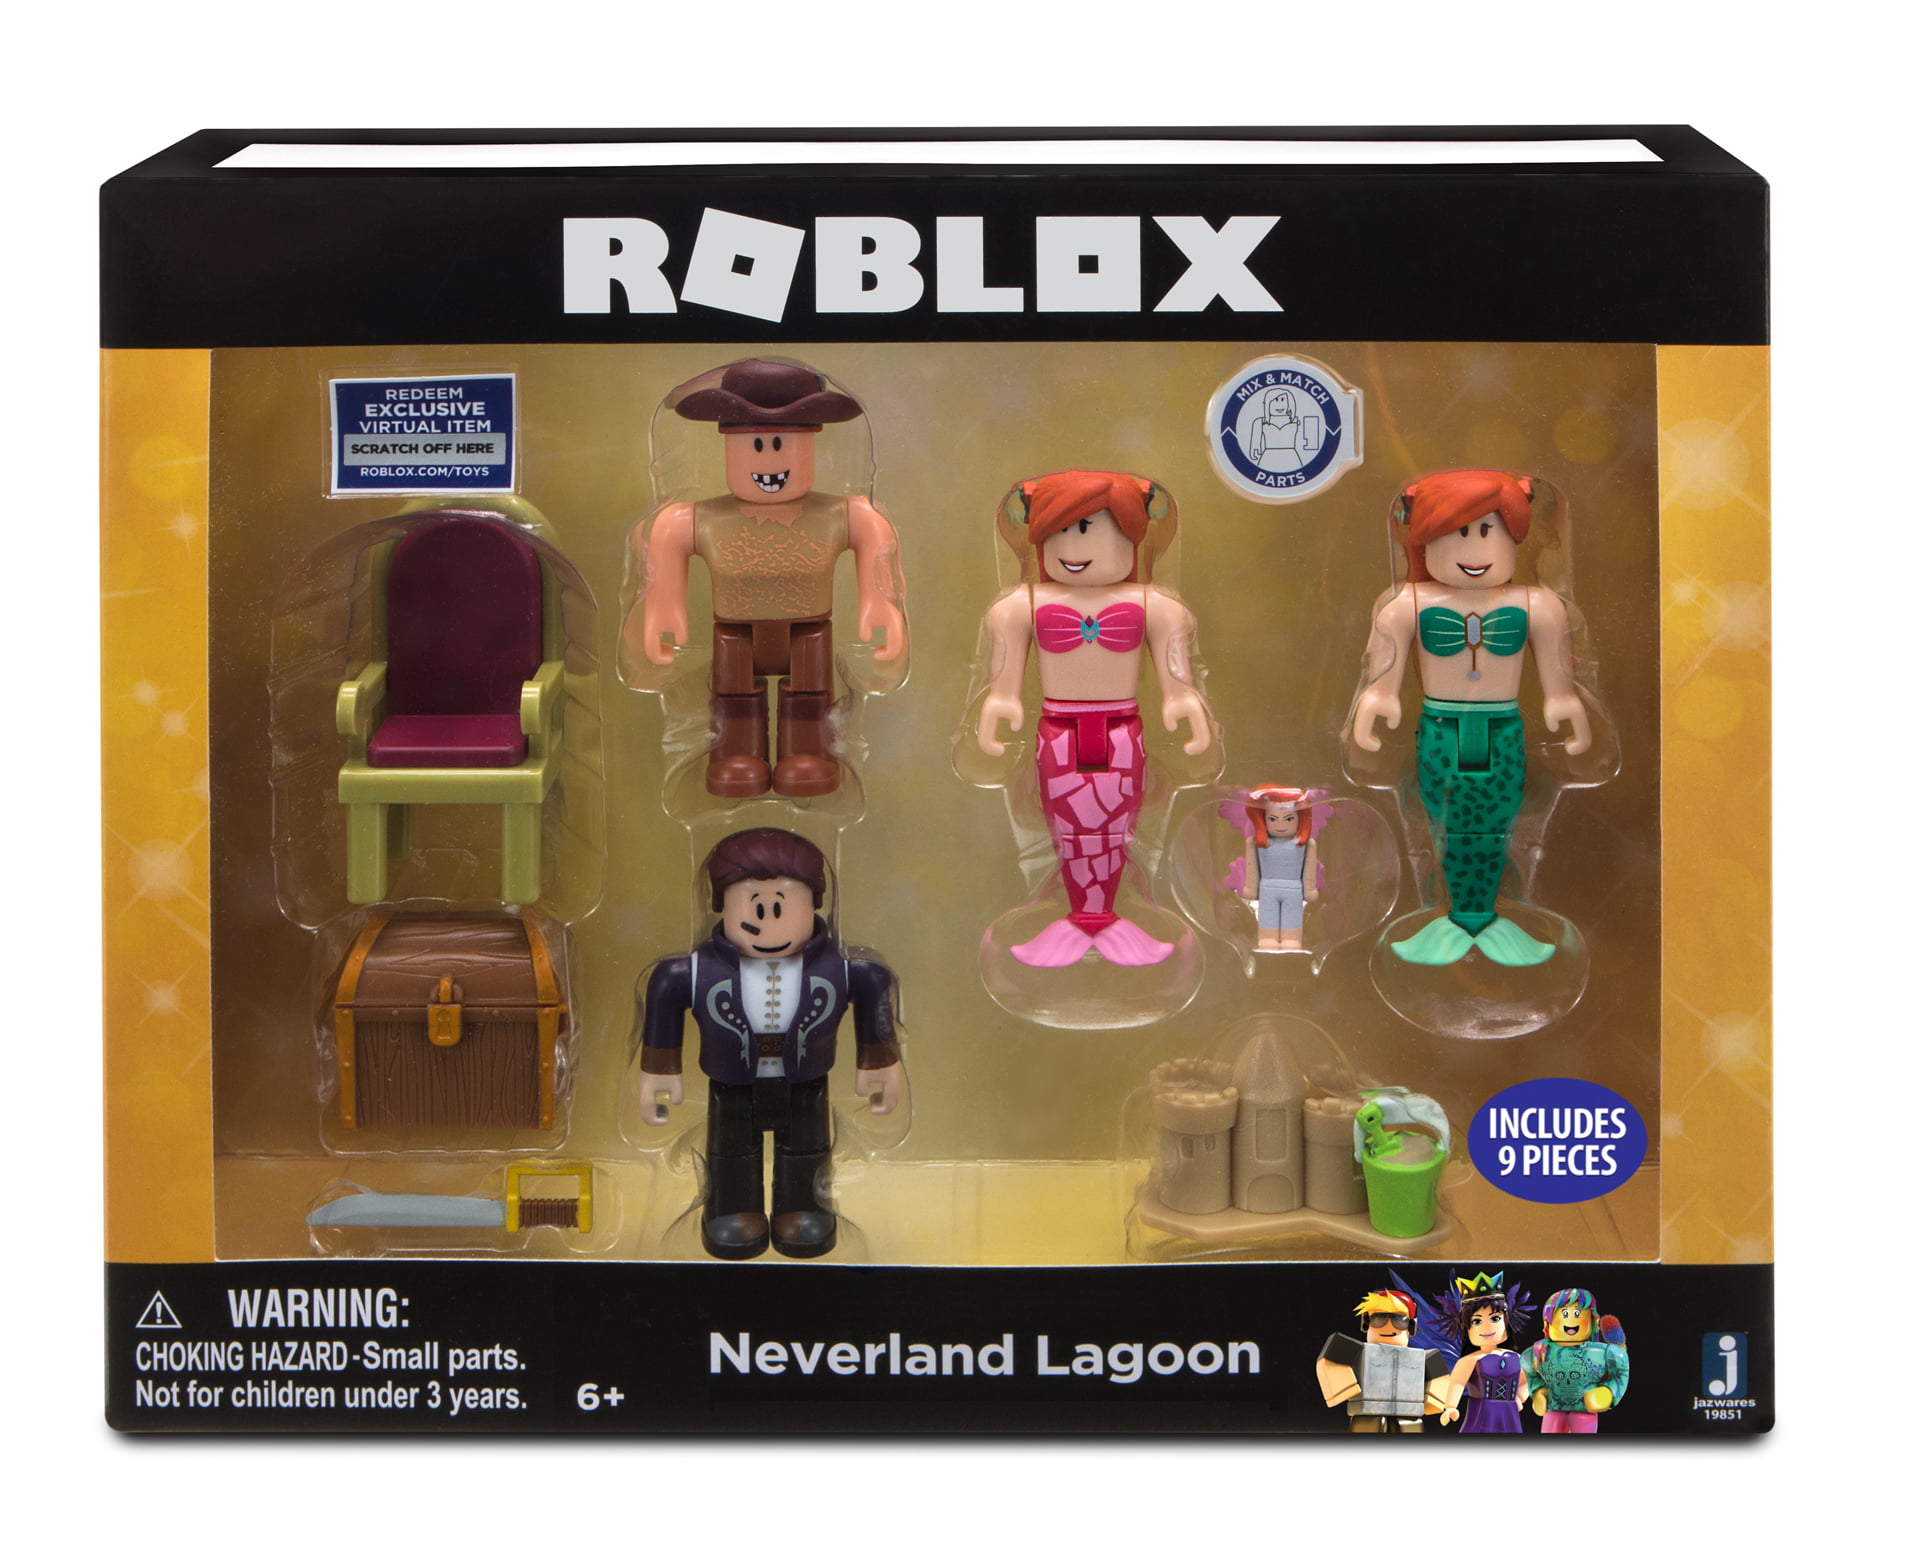 by The Sea Roblox Video Game Characters Buck-Eye Pirate Neverland Lagoon 4 Action Figures Mermaid Exclusive Virtual Code Accessories & Blue Celebrity Series 2 Blind Box Mini Figure Bundle RB Diamond